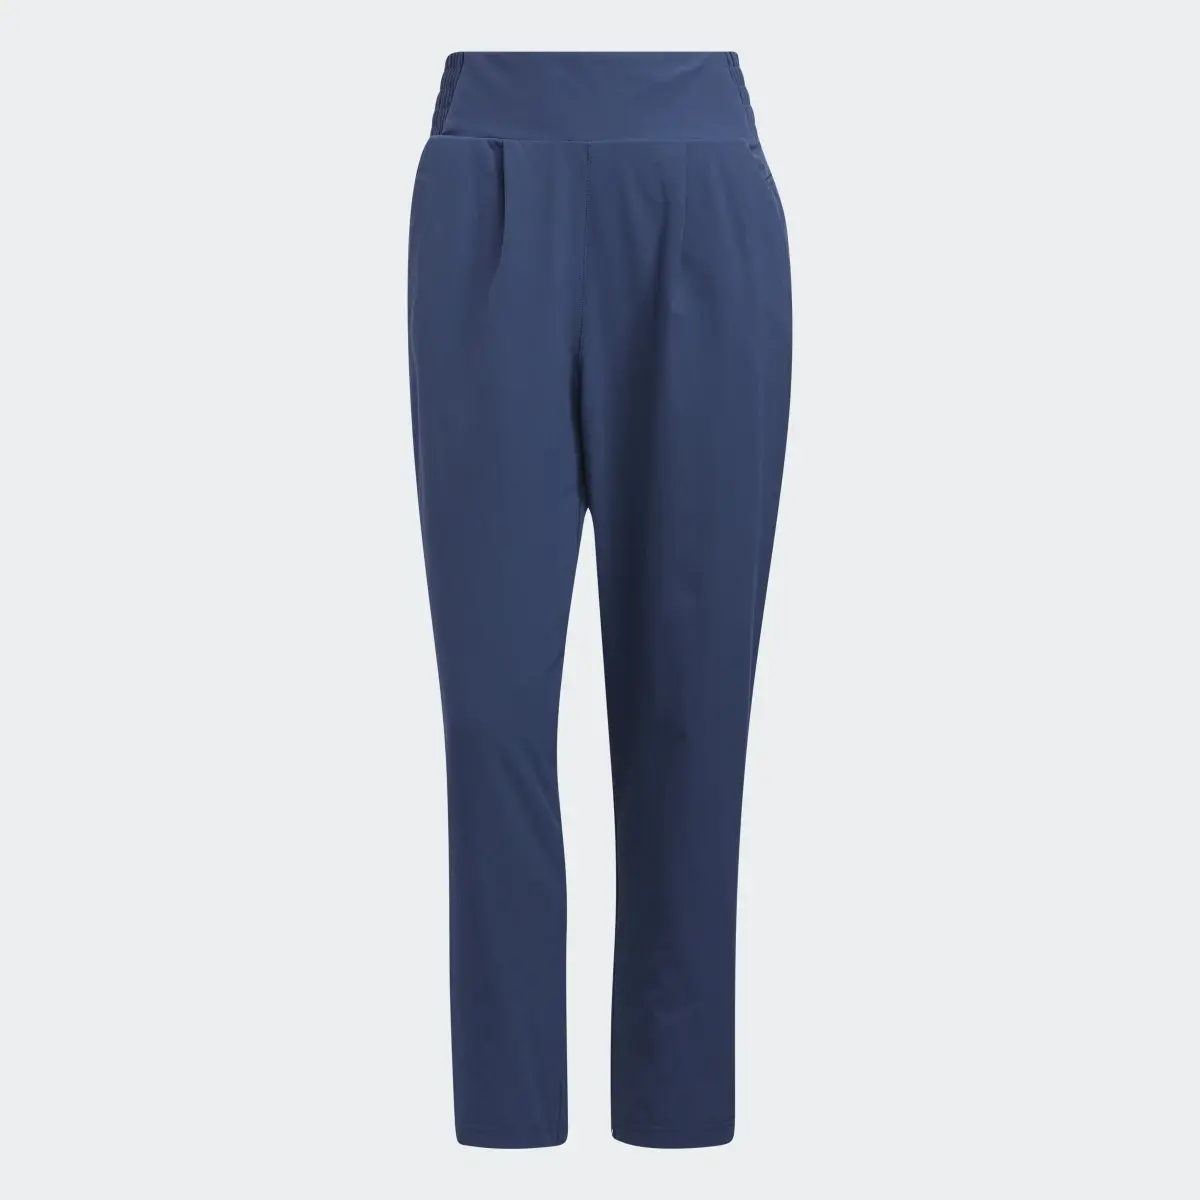 Adidas Go-To Pleated Golf Pants. 1